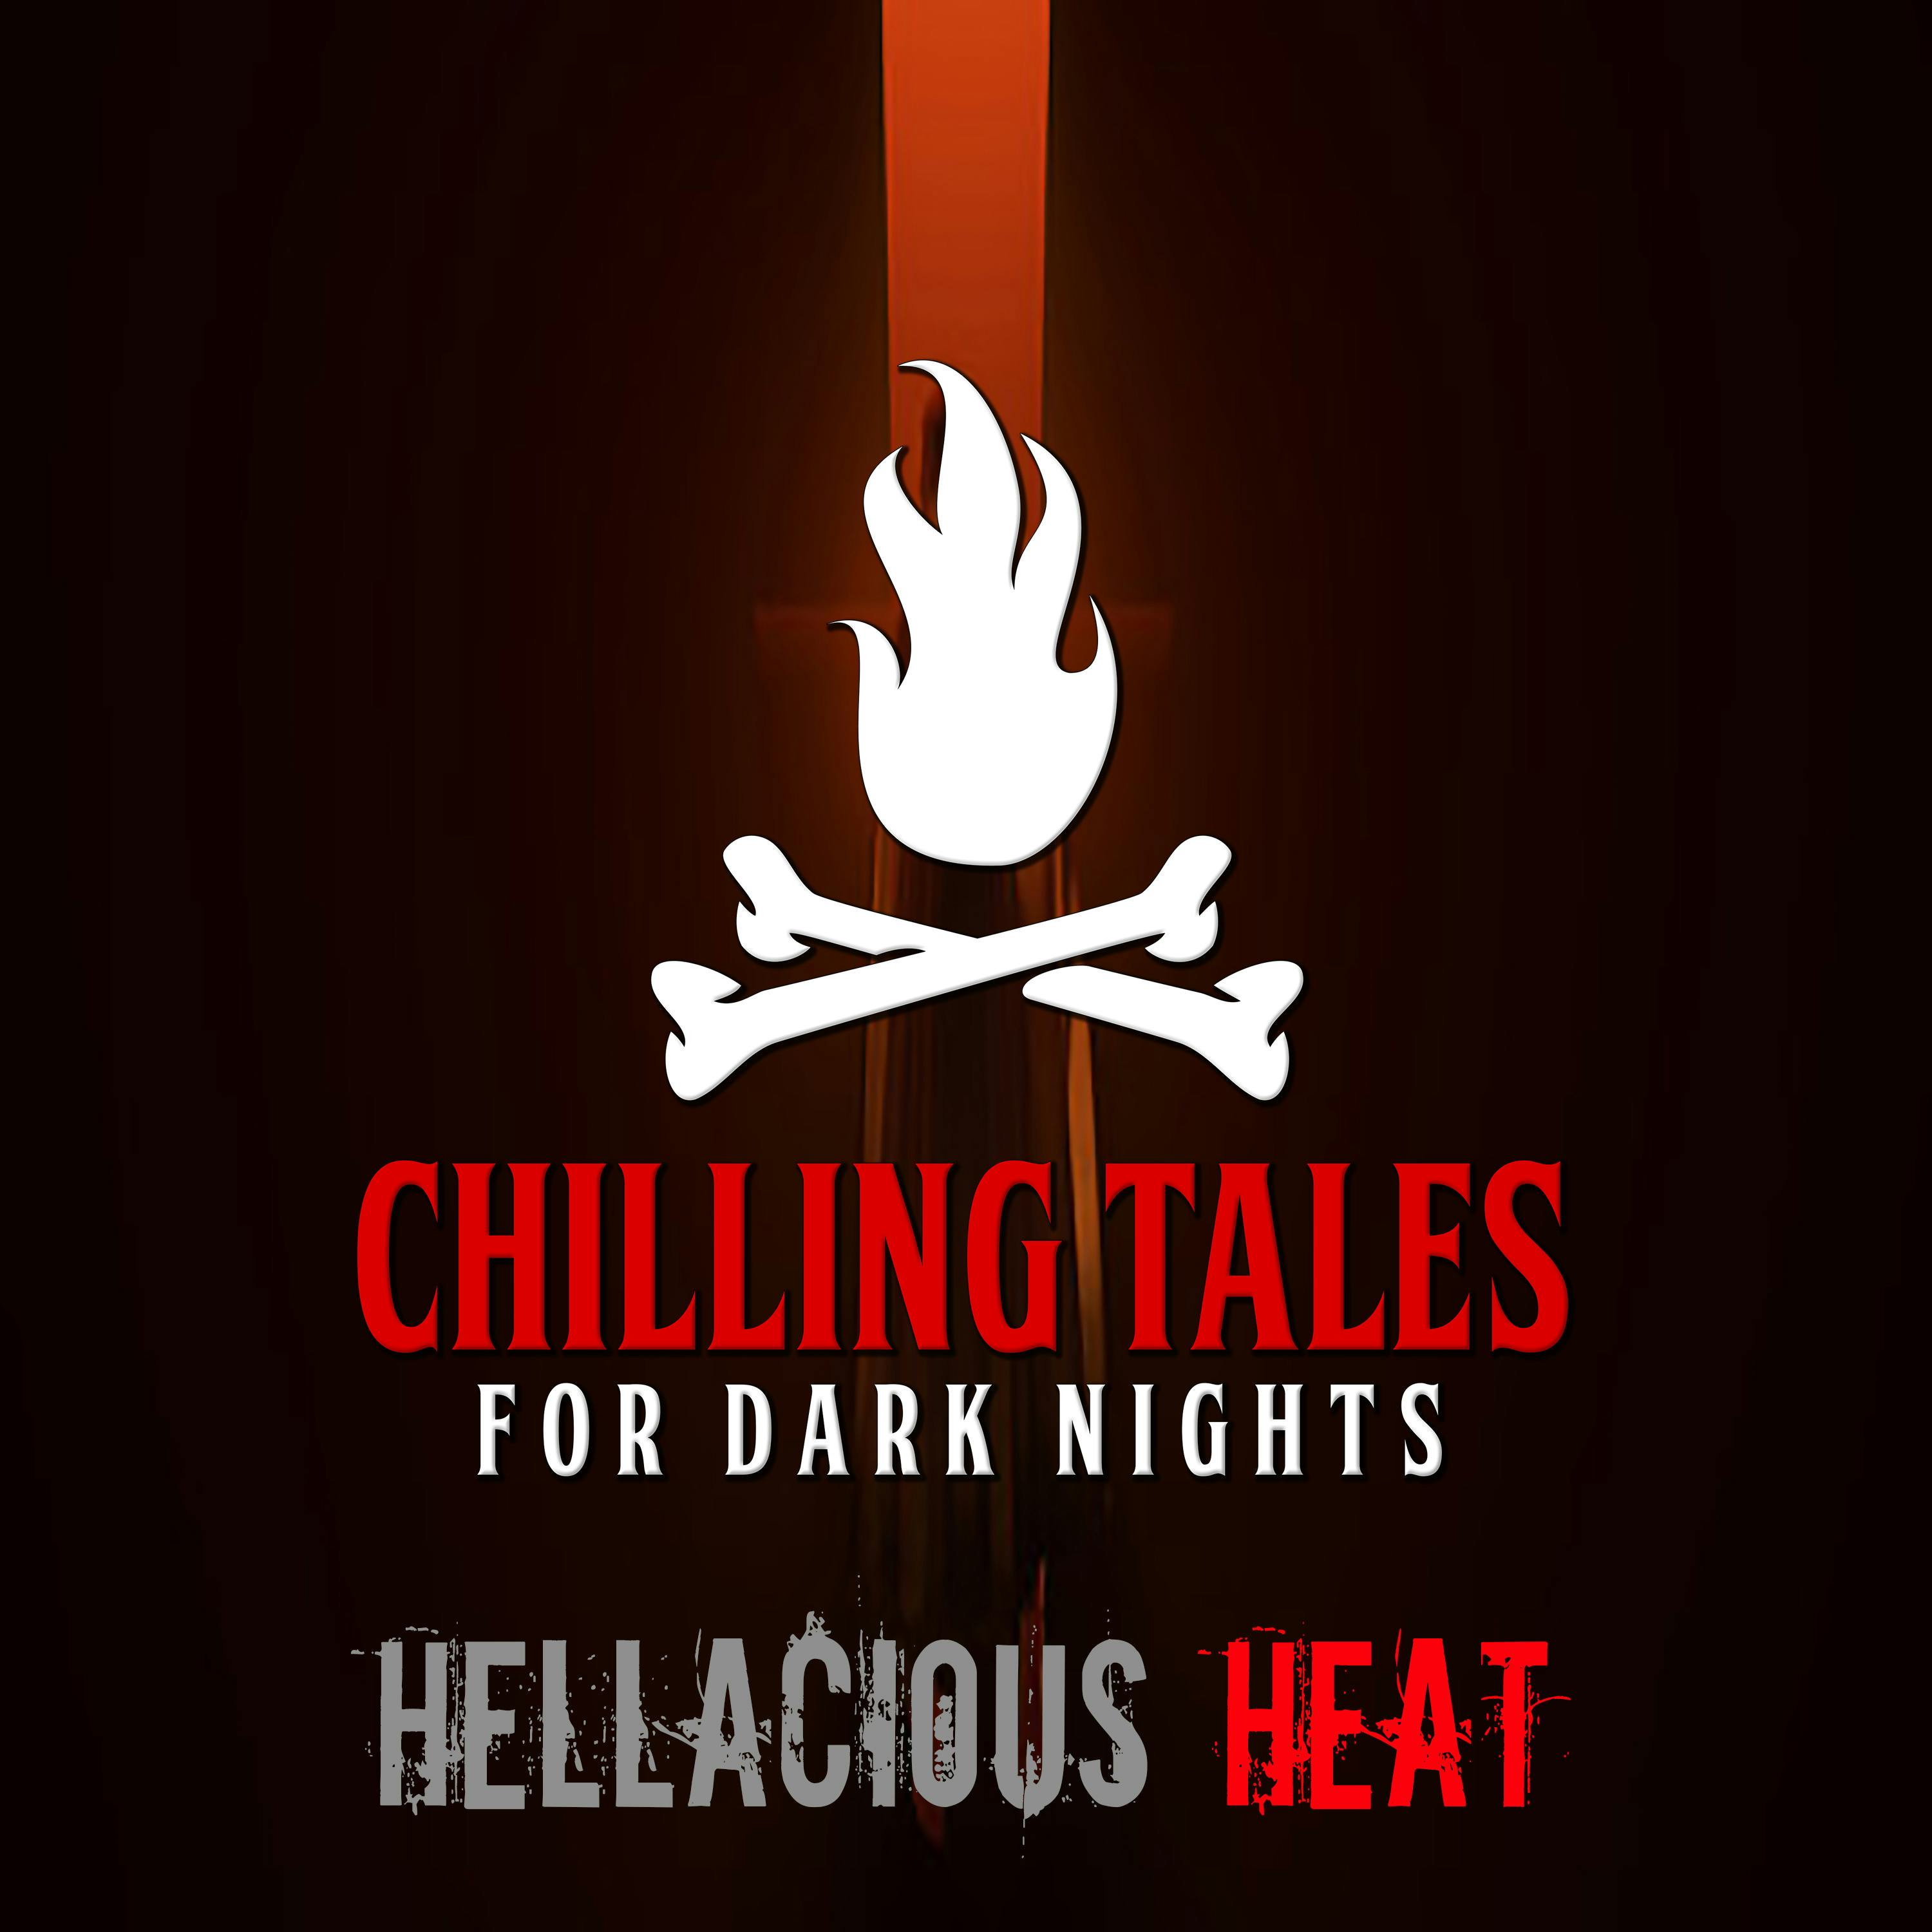 150: Hellacious Heat - Chilling Tales for Dark Nights